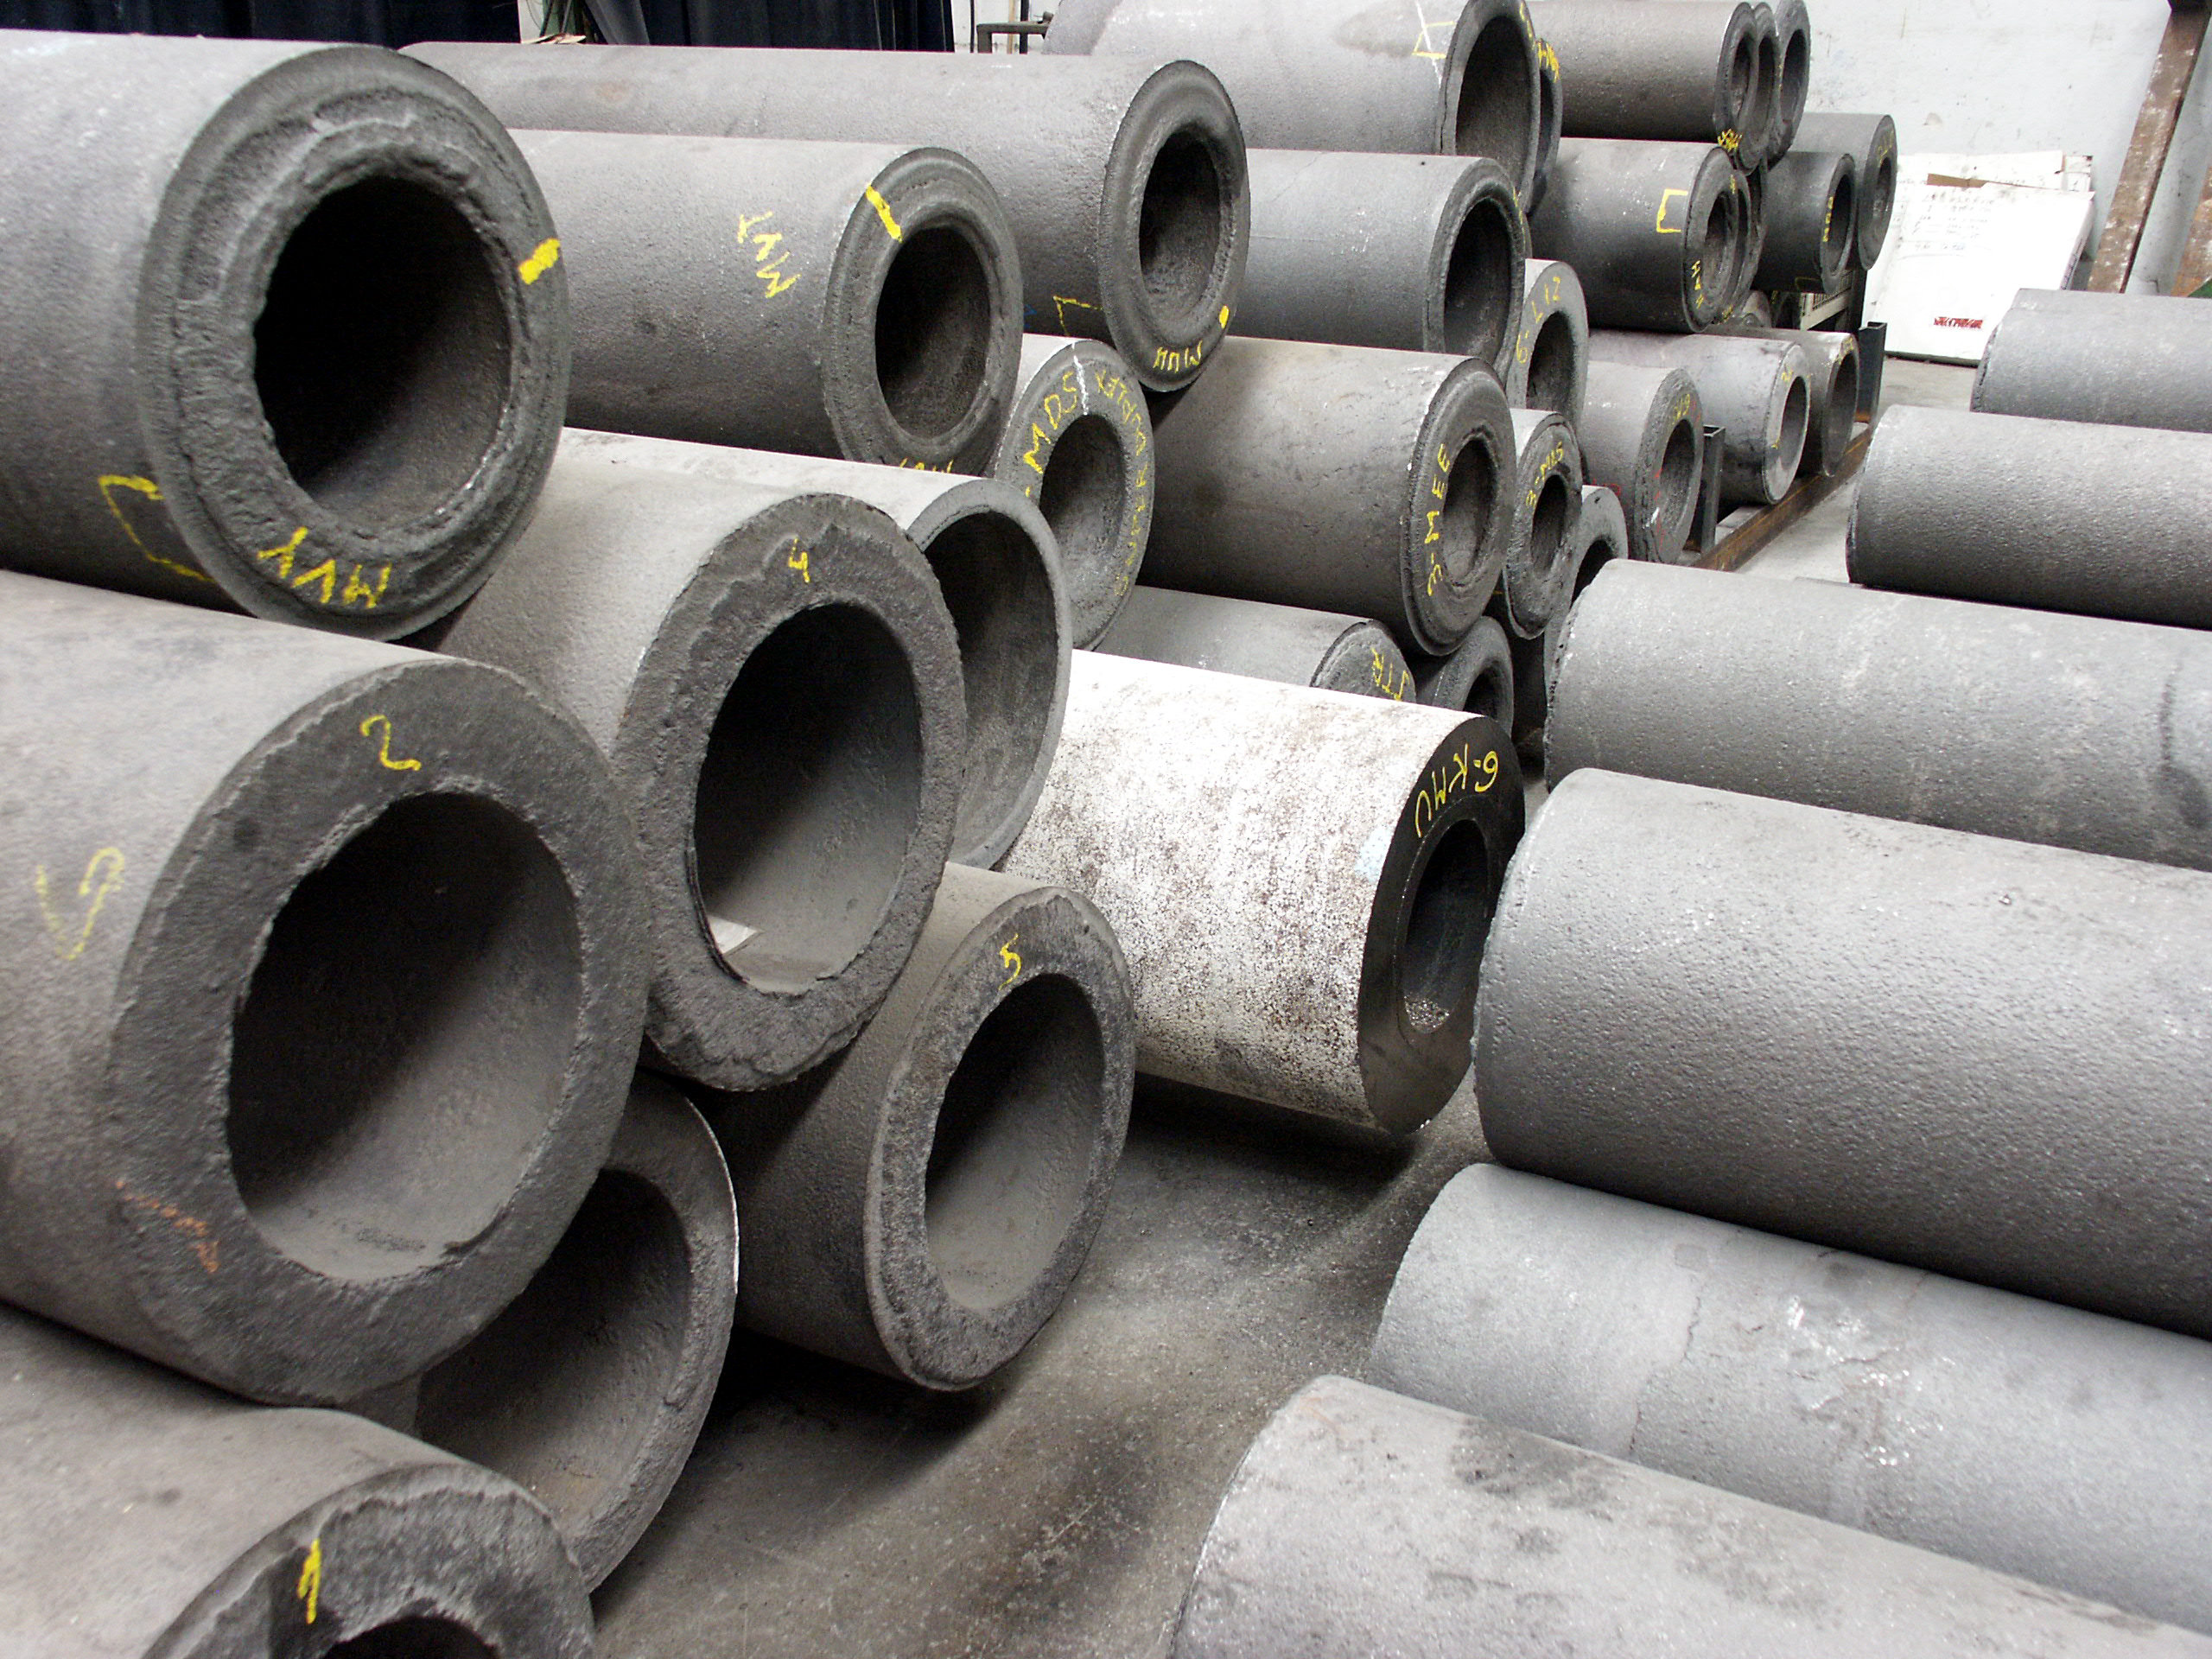 Tube stock in several stainless steel and high alloy grades